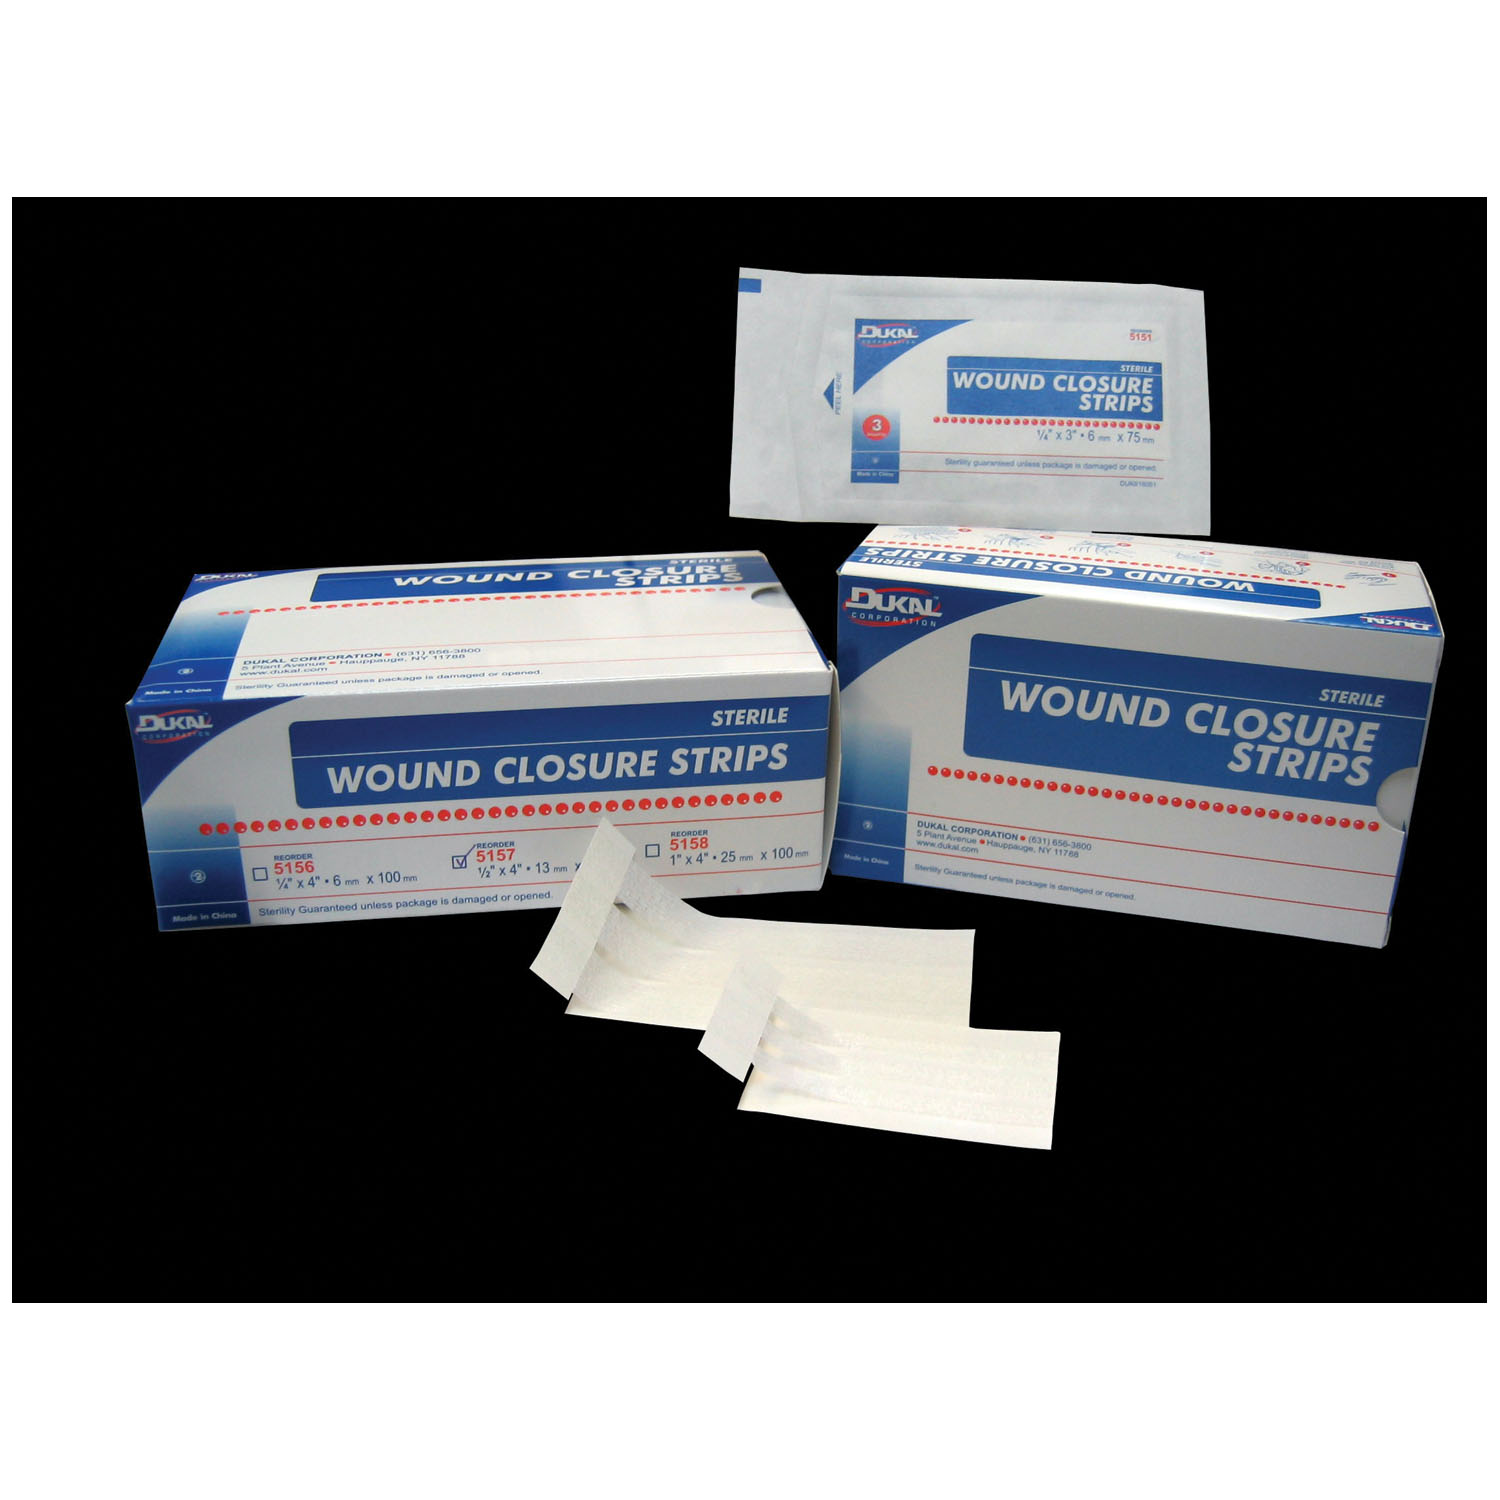 DUKAL WOUND CLOSURE STRIPS : 5156 BX $55.87 Stocked